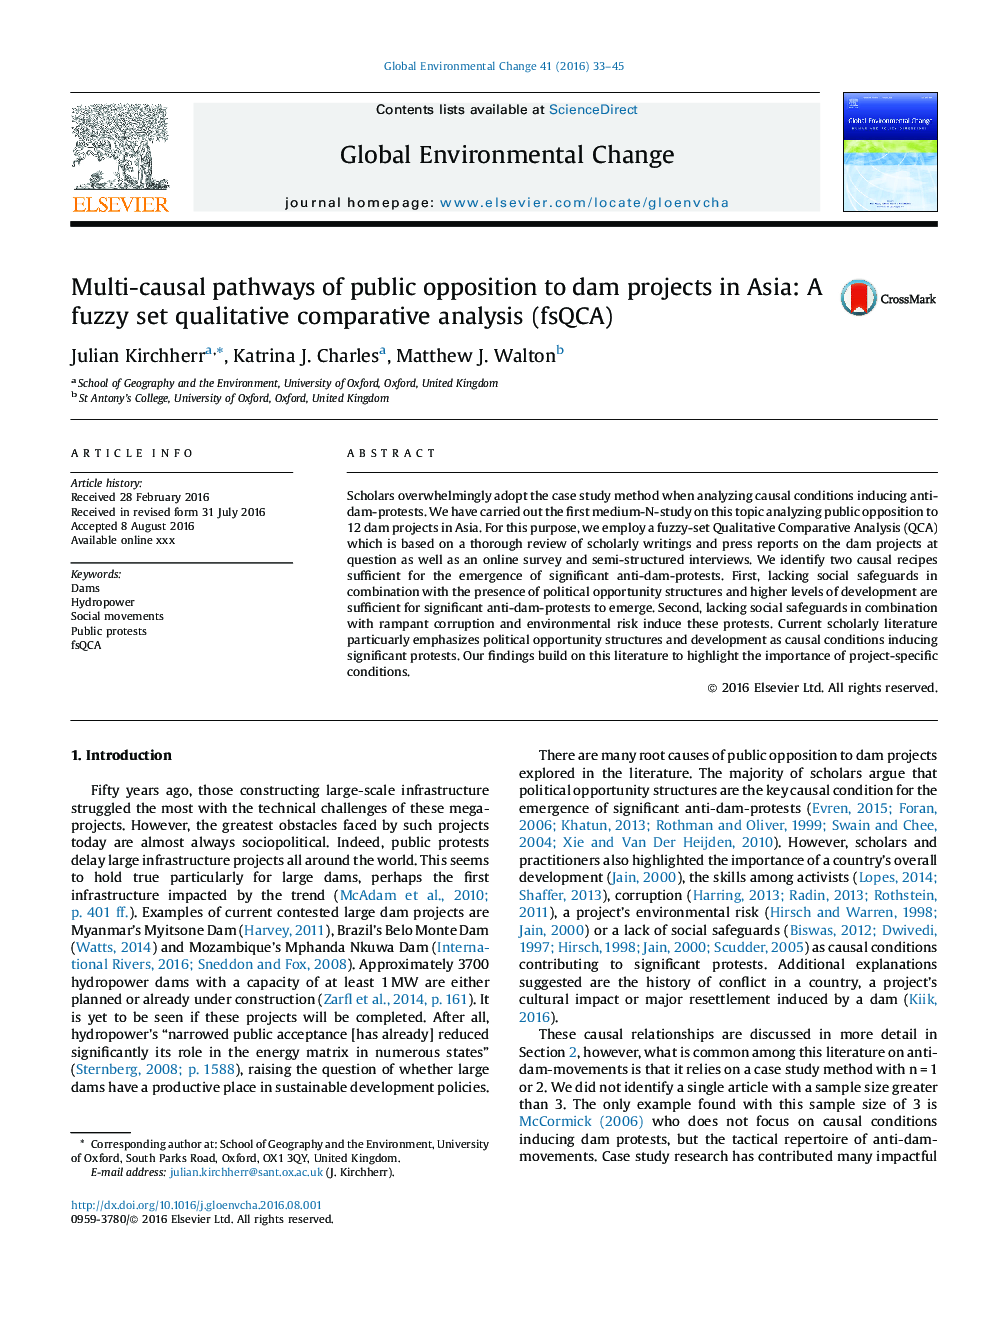 Multi-causal pathways of public opposition to dam projects in Asia: A fuzzy set qualitative comparative analysis (fsQCA)